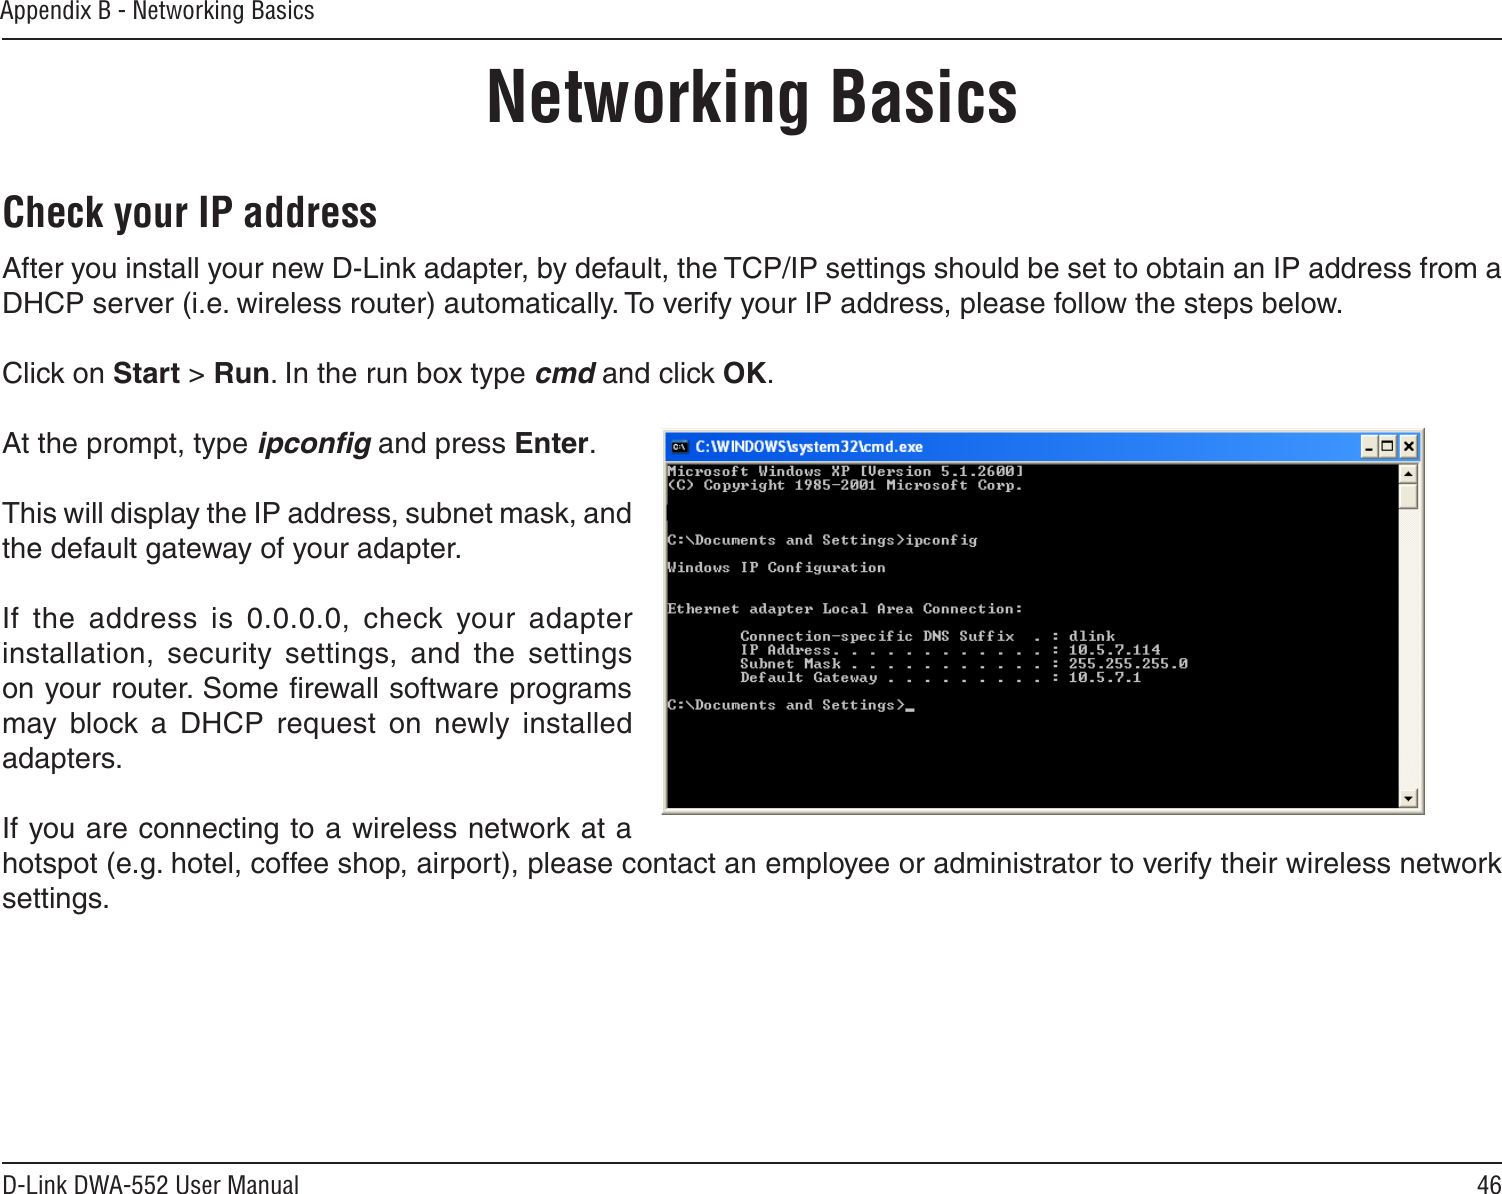 46D-Link DWA-552 User ManualAppendix B - Networking BasicsNetworking BasicsCheck your IP addressAfter you install your new D-Link adapter, by default, the TCP/IP settings should be set to obtain an IP address from a DHCP server (i.e. wireless router) automatically. To verify your IP address, please follow the steps below.Click on Start &gt; Run. In the run box type cmd and click OK.At the prompt, type ipconﬁg and press Enter.This will display the IP address, subnet mask, and the default gateway of your adapter.If  the  address  is  0.0.0.0,  check  your  adapter installation,  security  settings,  and  the  settings on your router. Some ﬁrewall software programs may  block  a  DHCP  request  on  newly  installed adapters. If you are connecting to a wireless network at a hotspot (e.g. hotel, coffee shop, airport), please contact an employee or administrator to verify their wireless network settings.